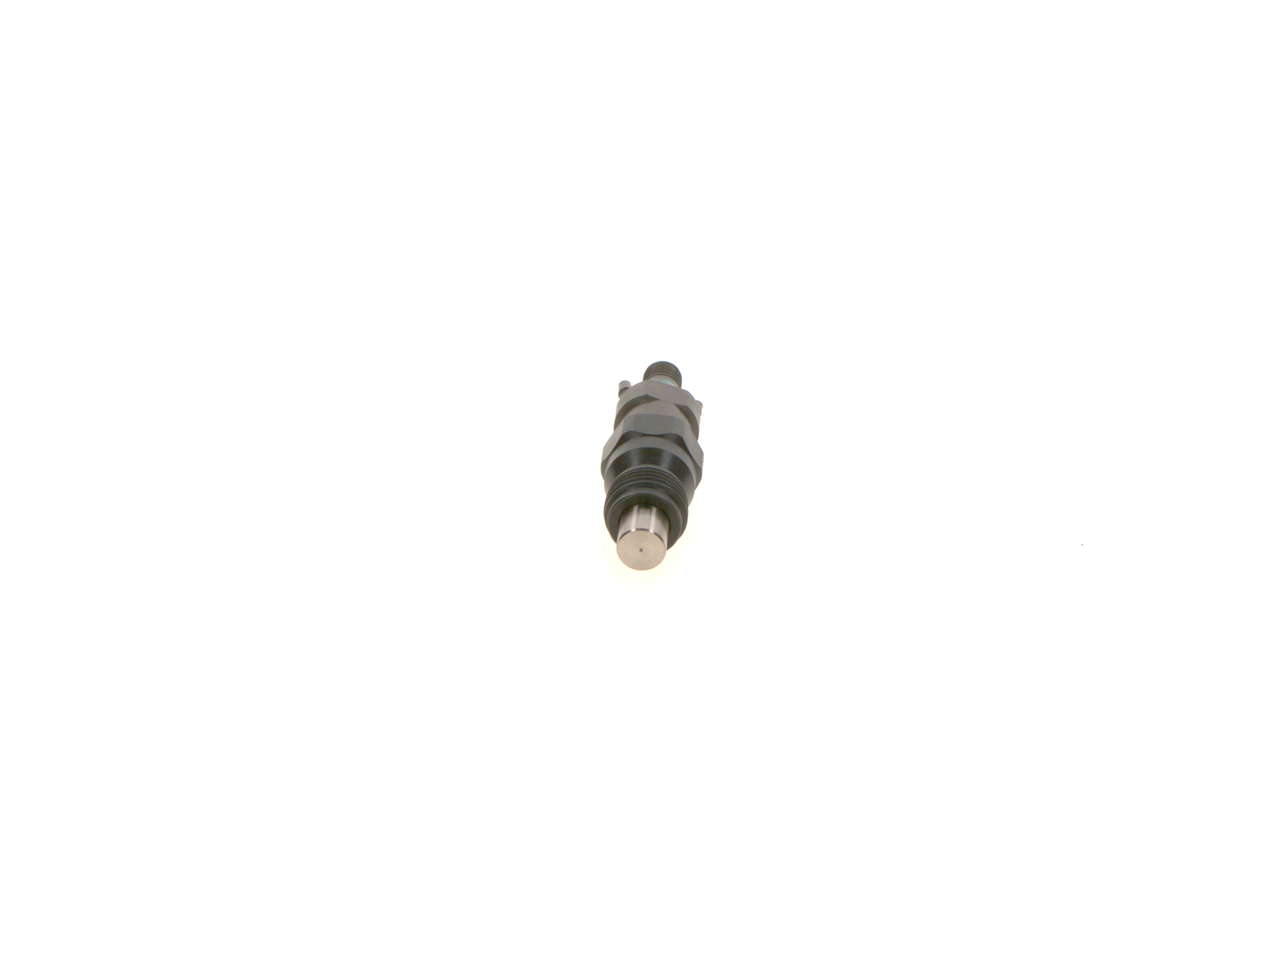 0986430244, Nozzle and Holder Assembly, BOSCH, 96069910, 96122780, KCA17S42, 0432217248, 0986430244